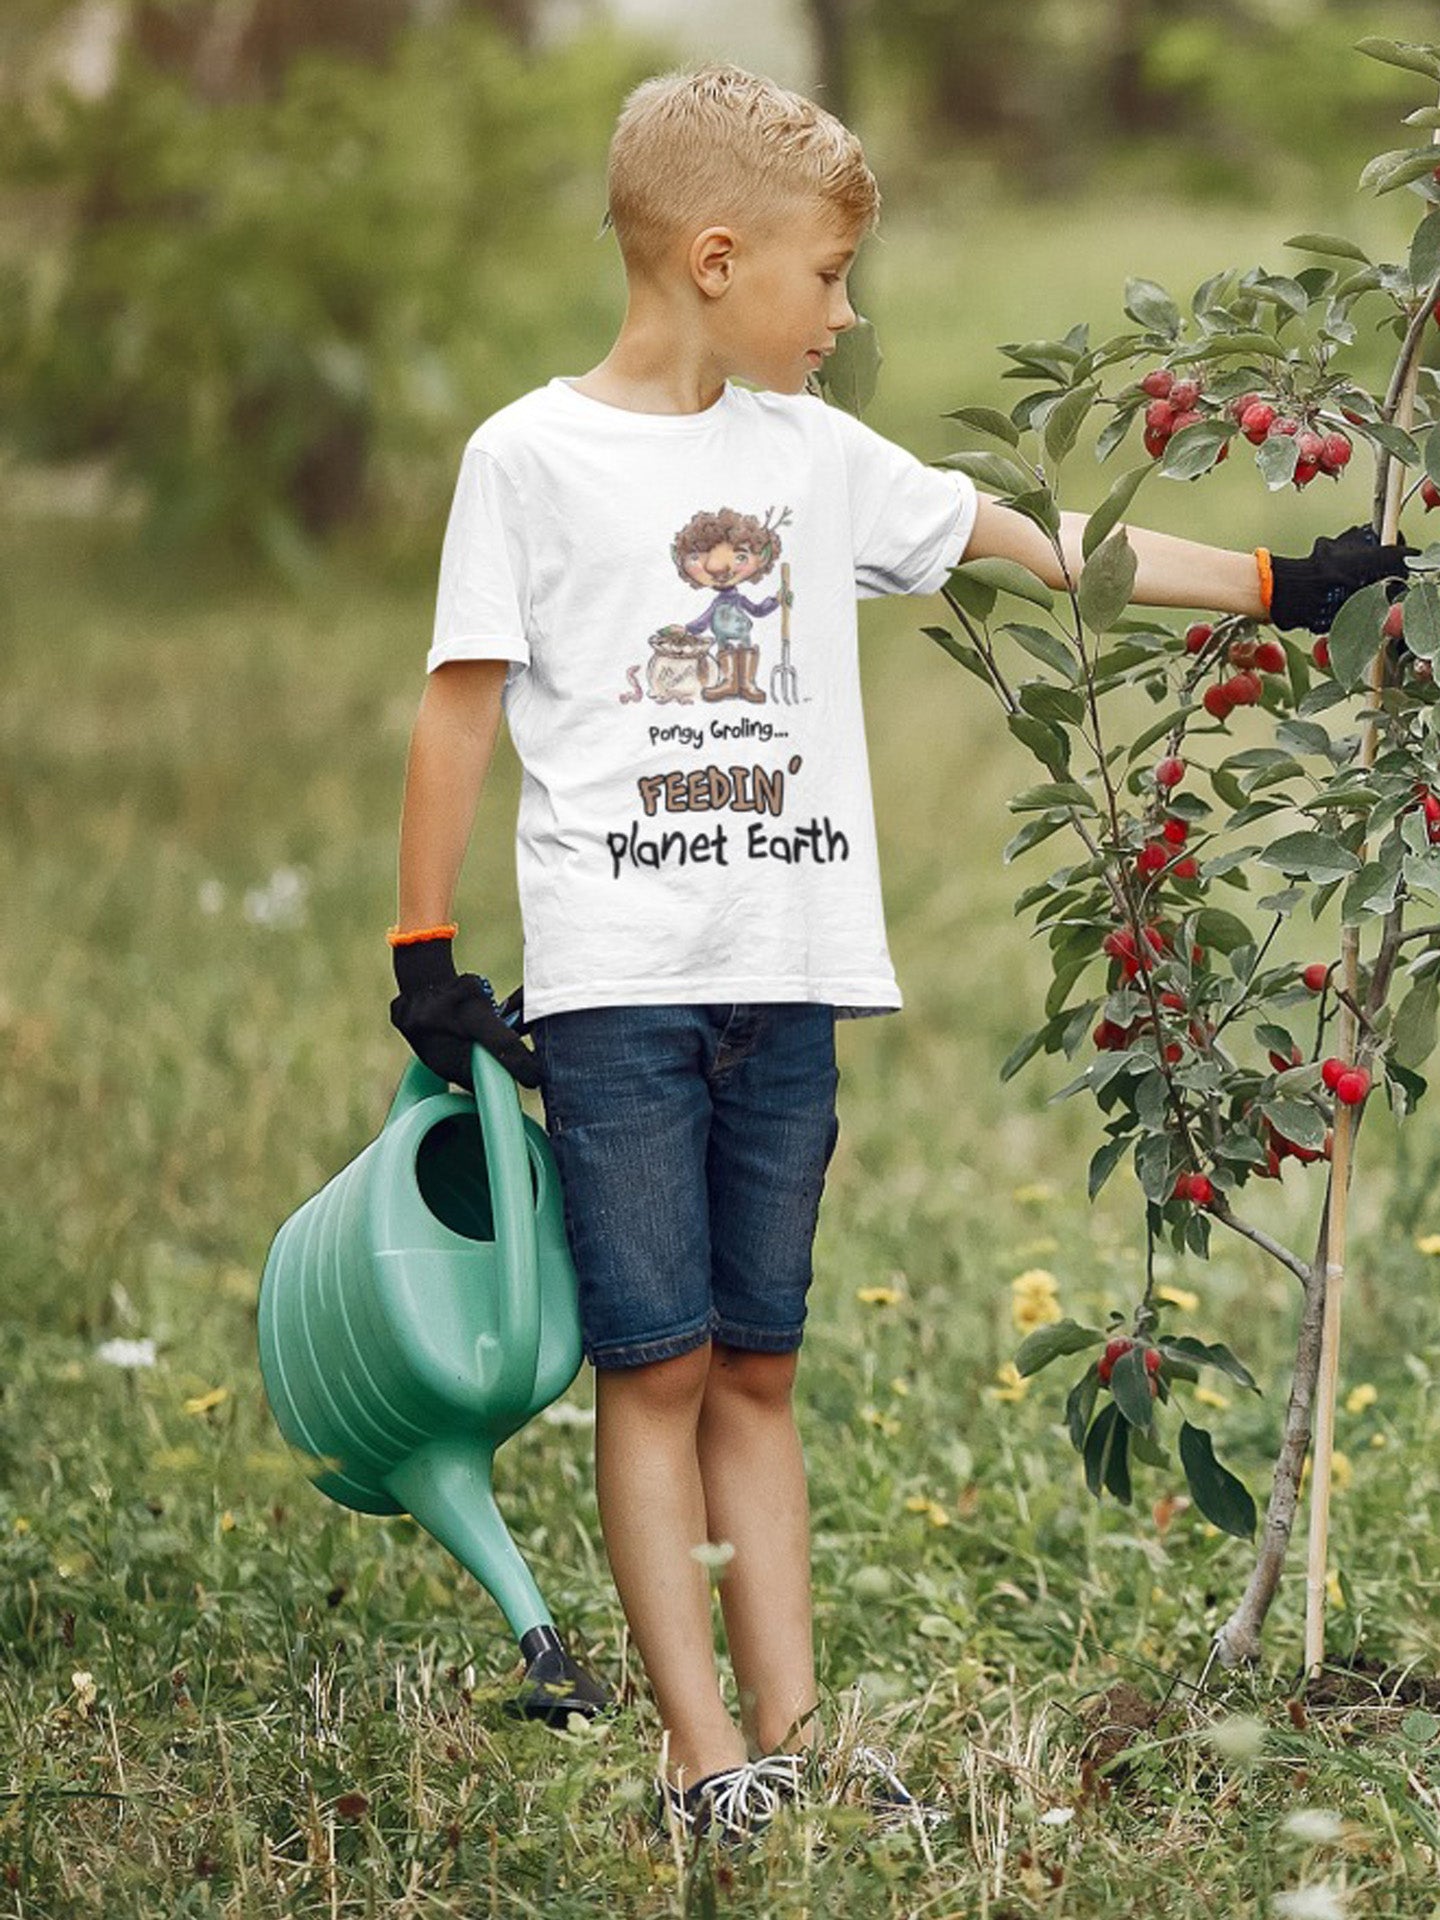 A white official USA Grolings kids' t-shirt, featuring the phrase 'Pongy Groling... Feedin’ Planet Earth.' The t-shirt showcases Pongy Groling, a character from ‘Matisse and the Topsy-Turvy Farm,’ standing beside a sack of compost. Pongy Groling is holding a garden fork, and a friendly worm is watching. Worn by a young boy standing beside a recently planted tree holding a watering can. The